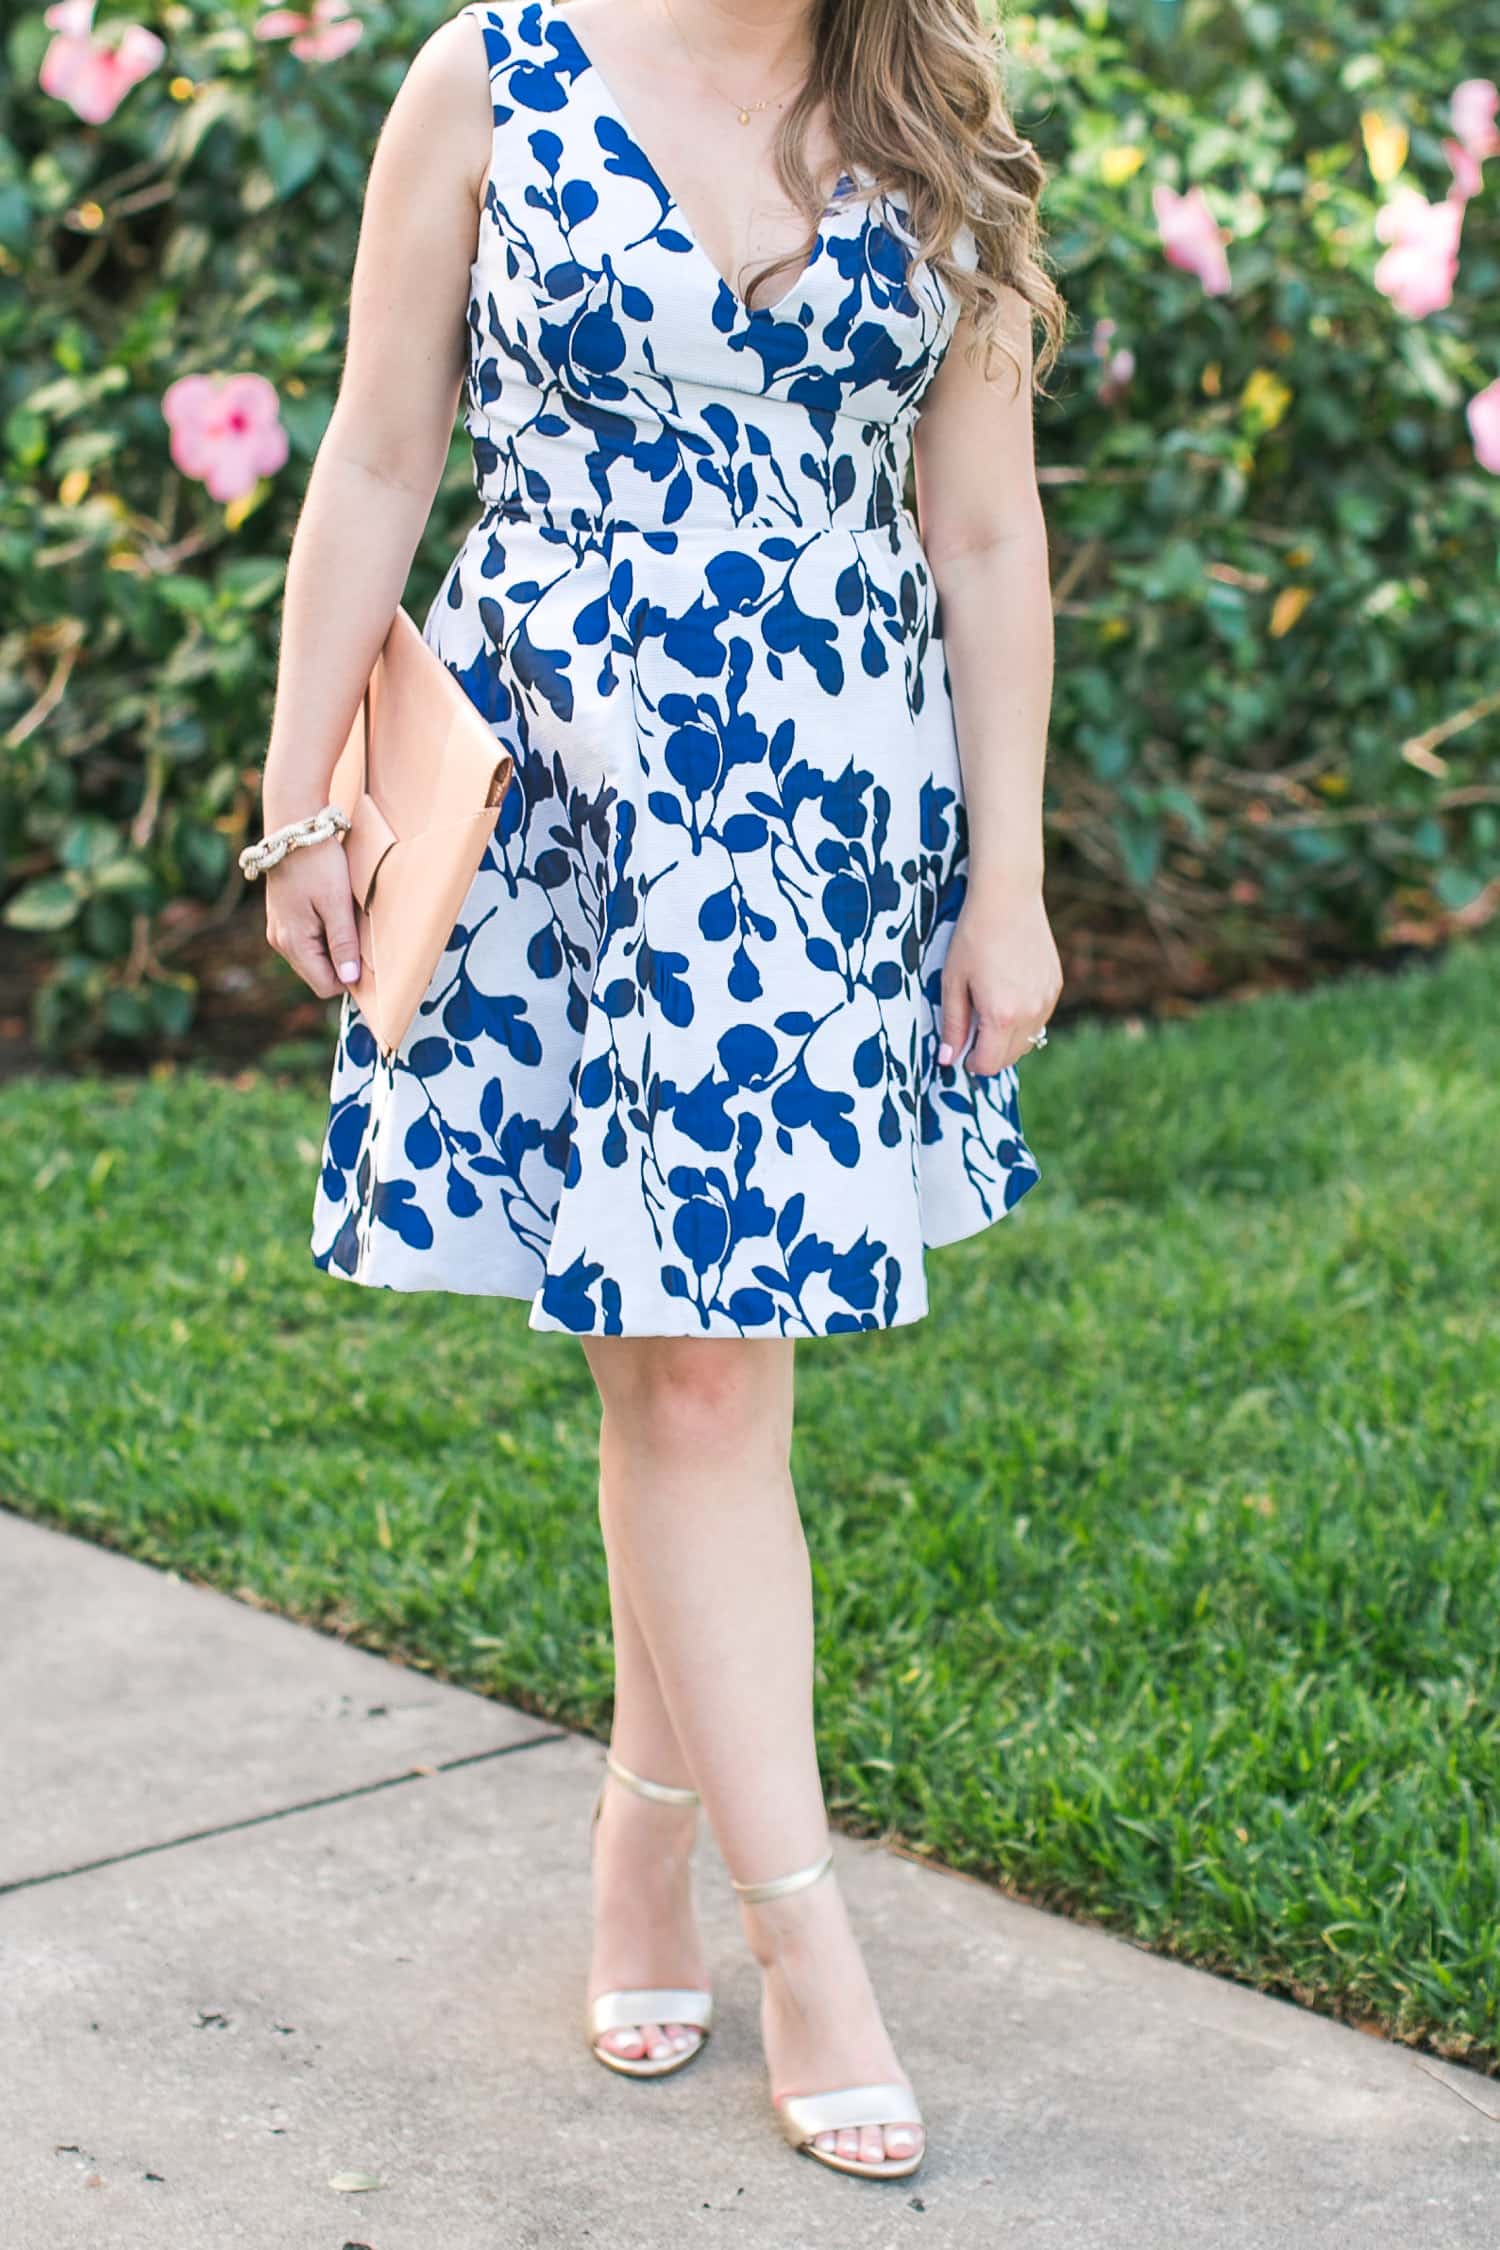 The perfect floral fit and flare dress | what to wear to a wedding | cute maternity outfit idea | dressy outfit idea by Orlando Florida fashion blogger Ashley Brooke Nicholas | preppy fashion, preppy style, beautiful dresses | Betsey Johnson floral dress, Sam Edelman metallic gold heeled sandals Yaro, Banana Republic nude bow clutch